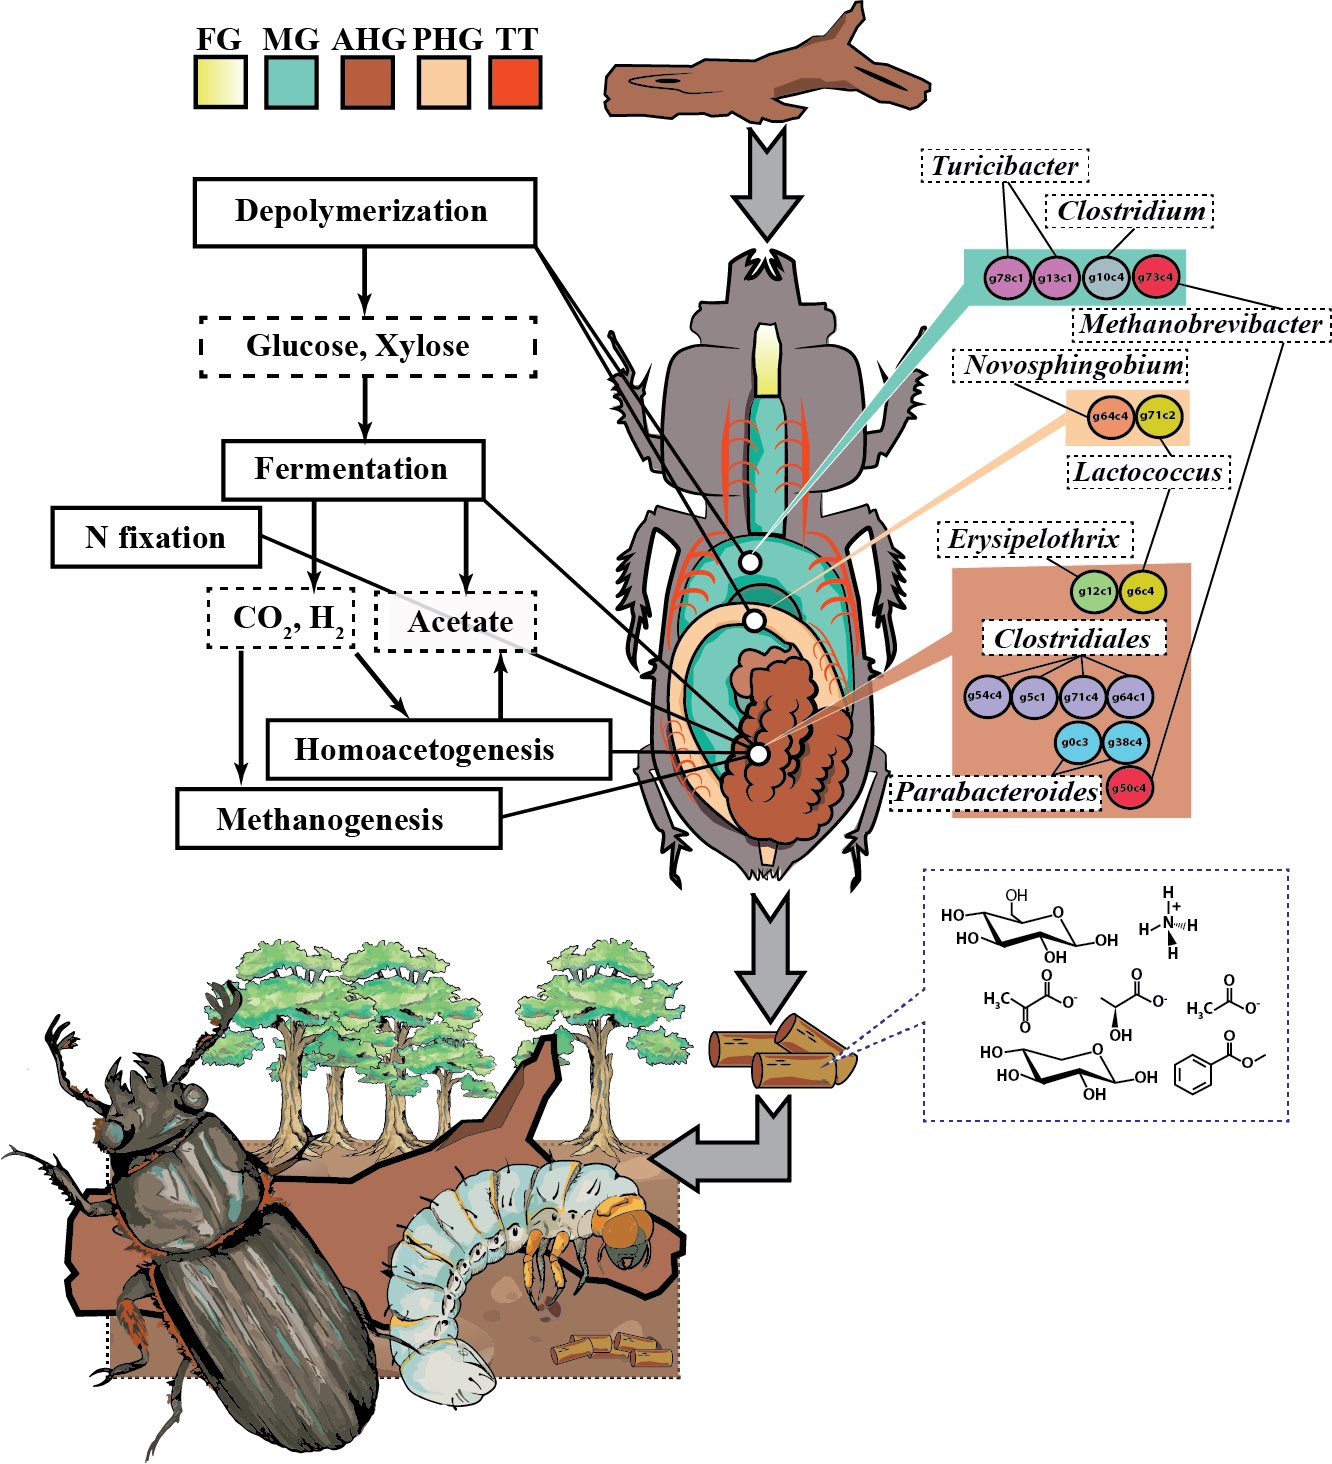 A diagram of the passalid beetle’s compartmentalized gut, and the distribution of metabolic processes and microbial composition by compartment.